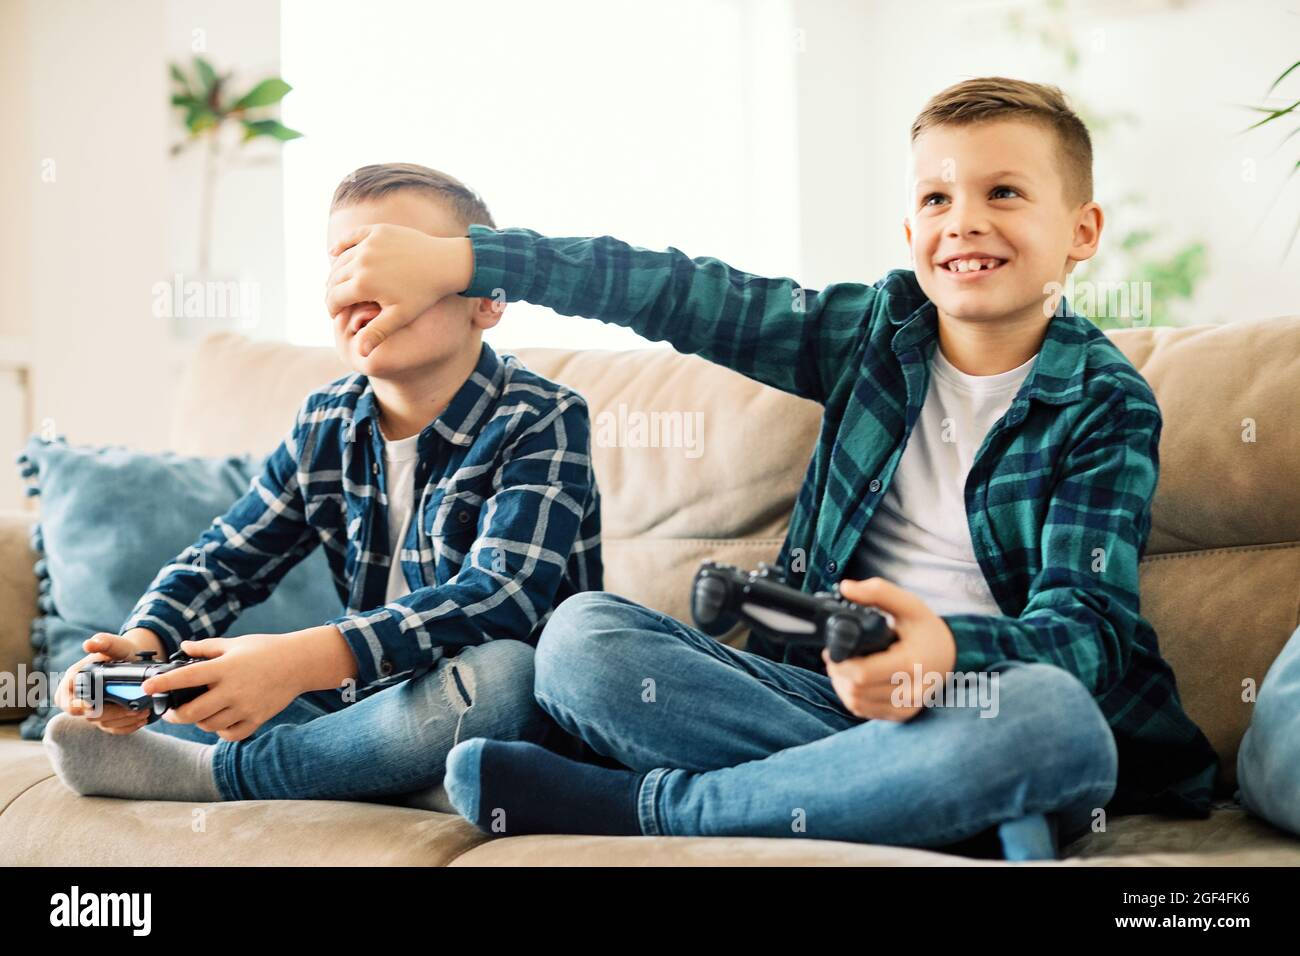 child brother friend having fun playing console laughing happy kid controller gaming Stock Photo